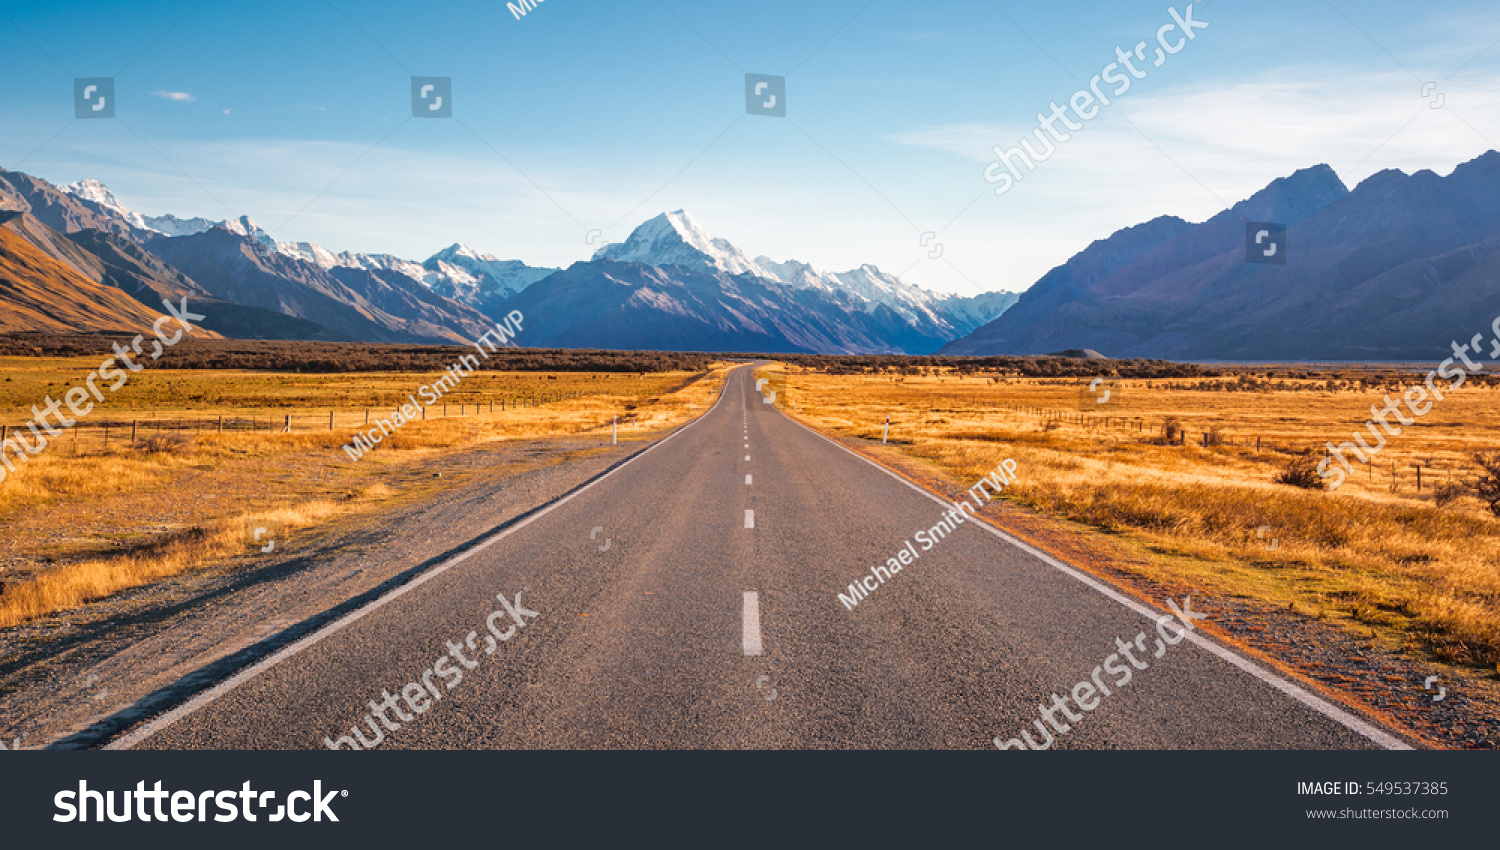 A long straight road leading towards a snow capped mountain in New Zealand #549537385